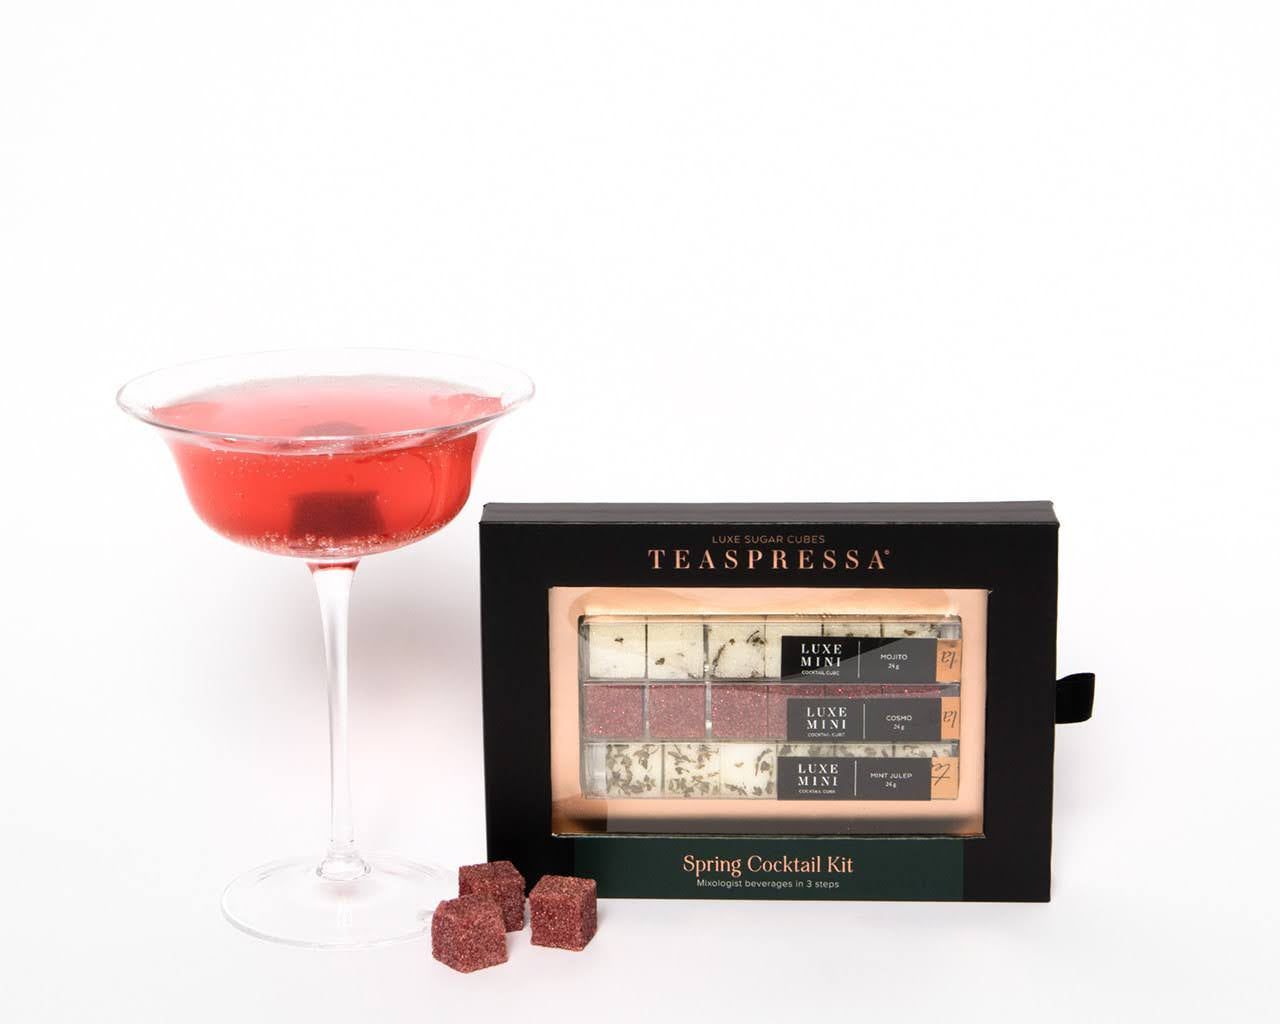 Luxe Mini Instant Cocktail Cubes by Teaspressa showing white and red cubes. Some cubes sitting outsite next to red cocktail drink. 